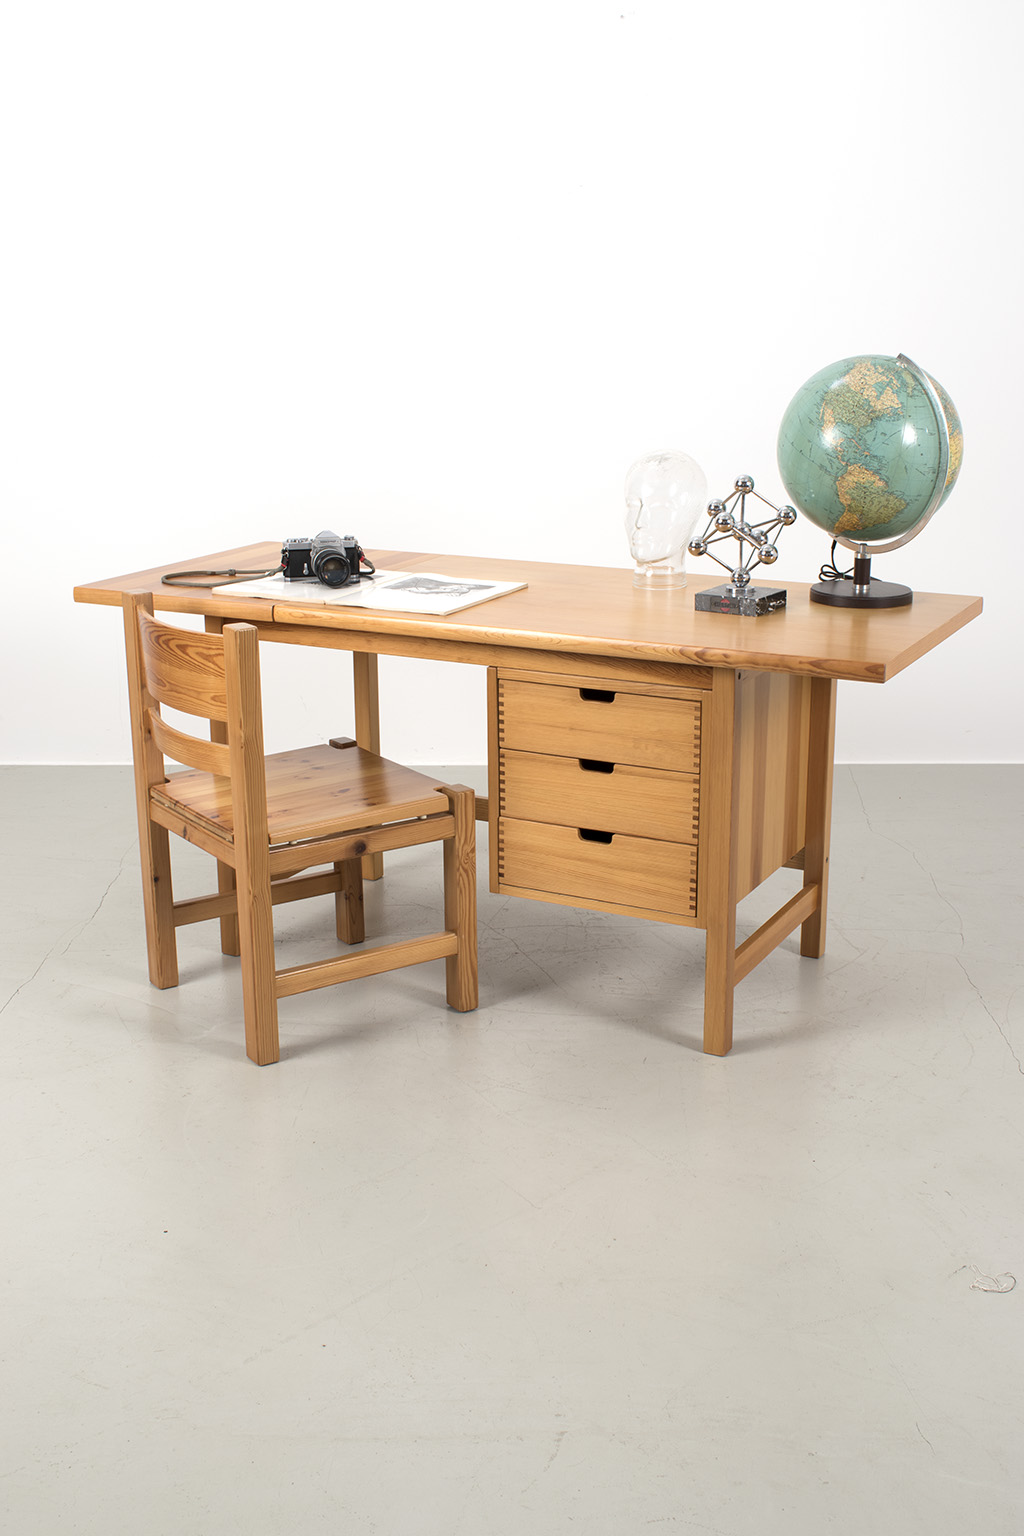 Pine wooden desk with matching chair